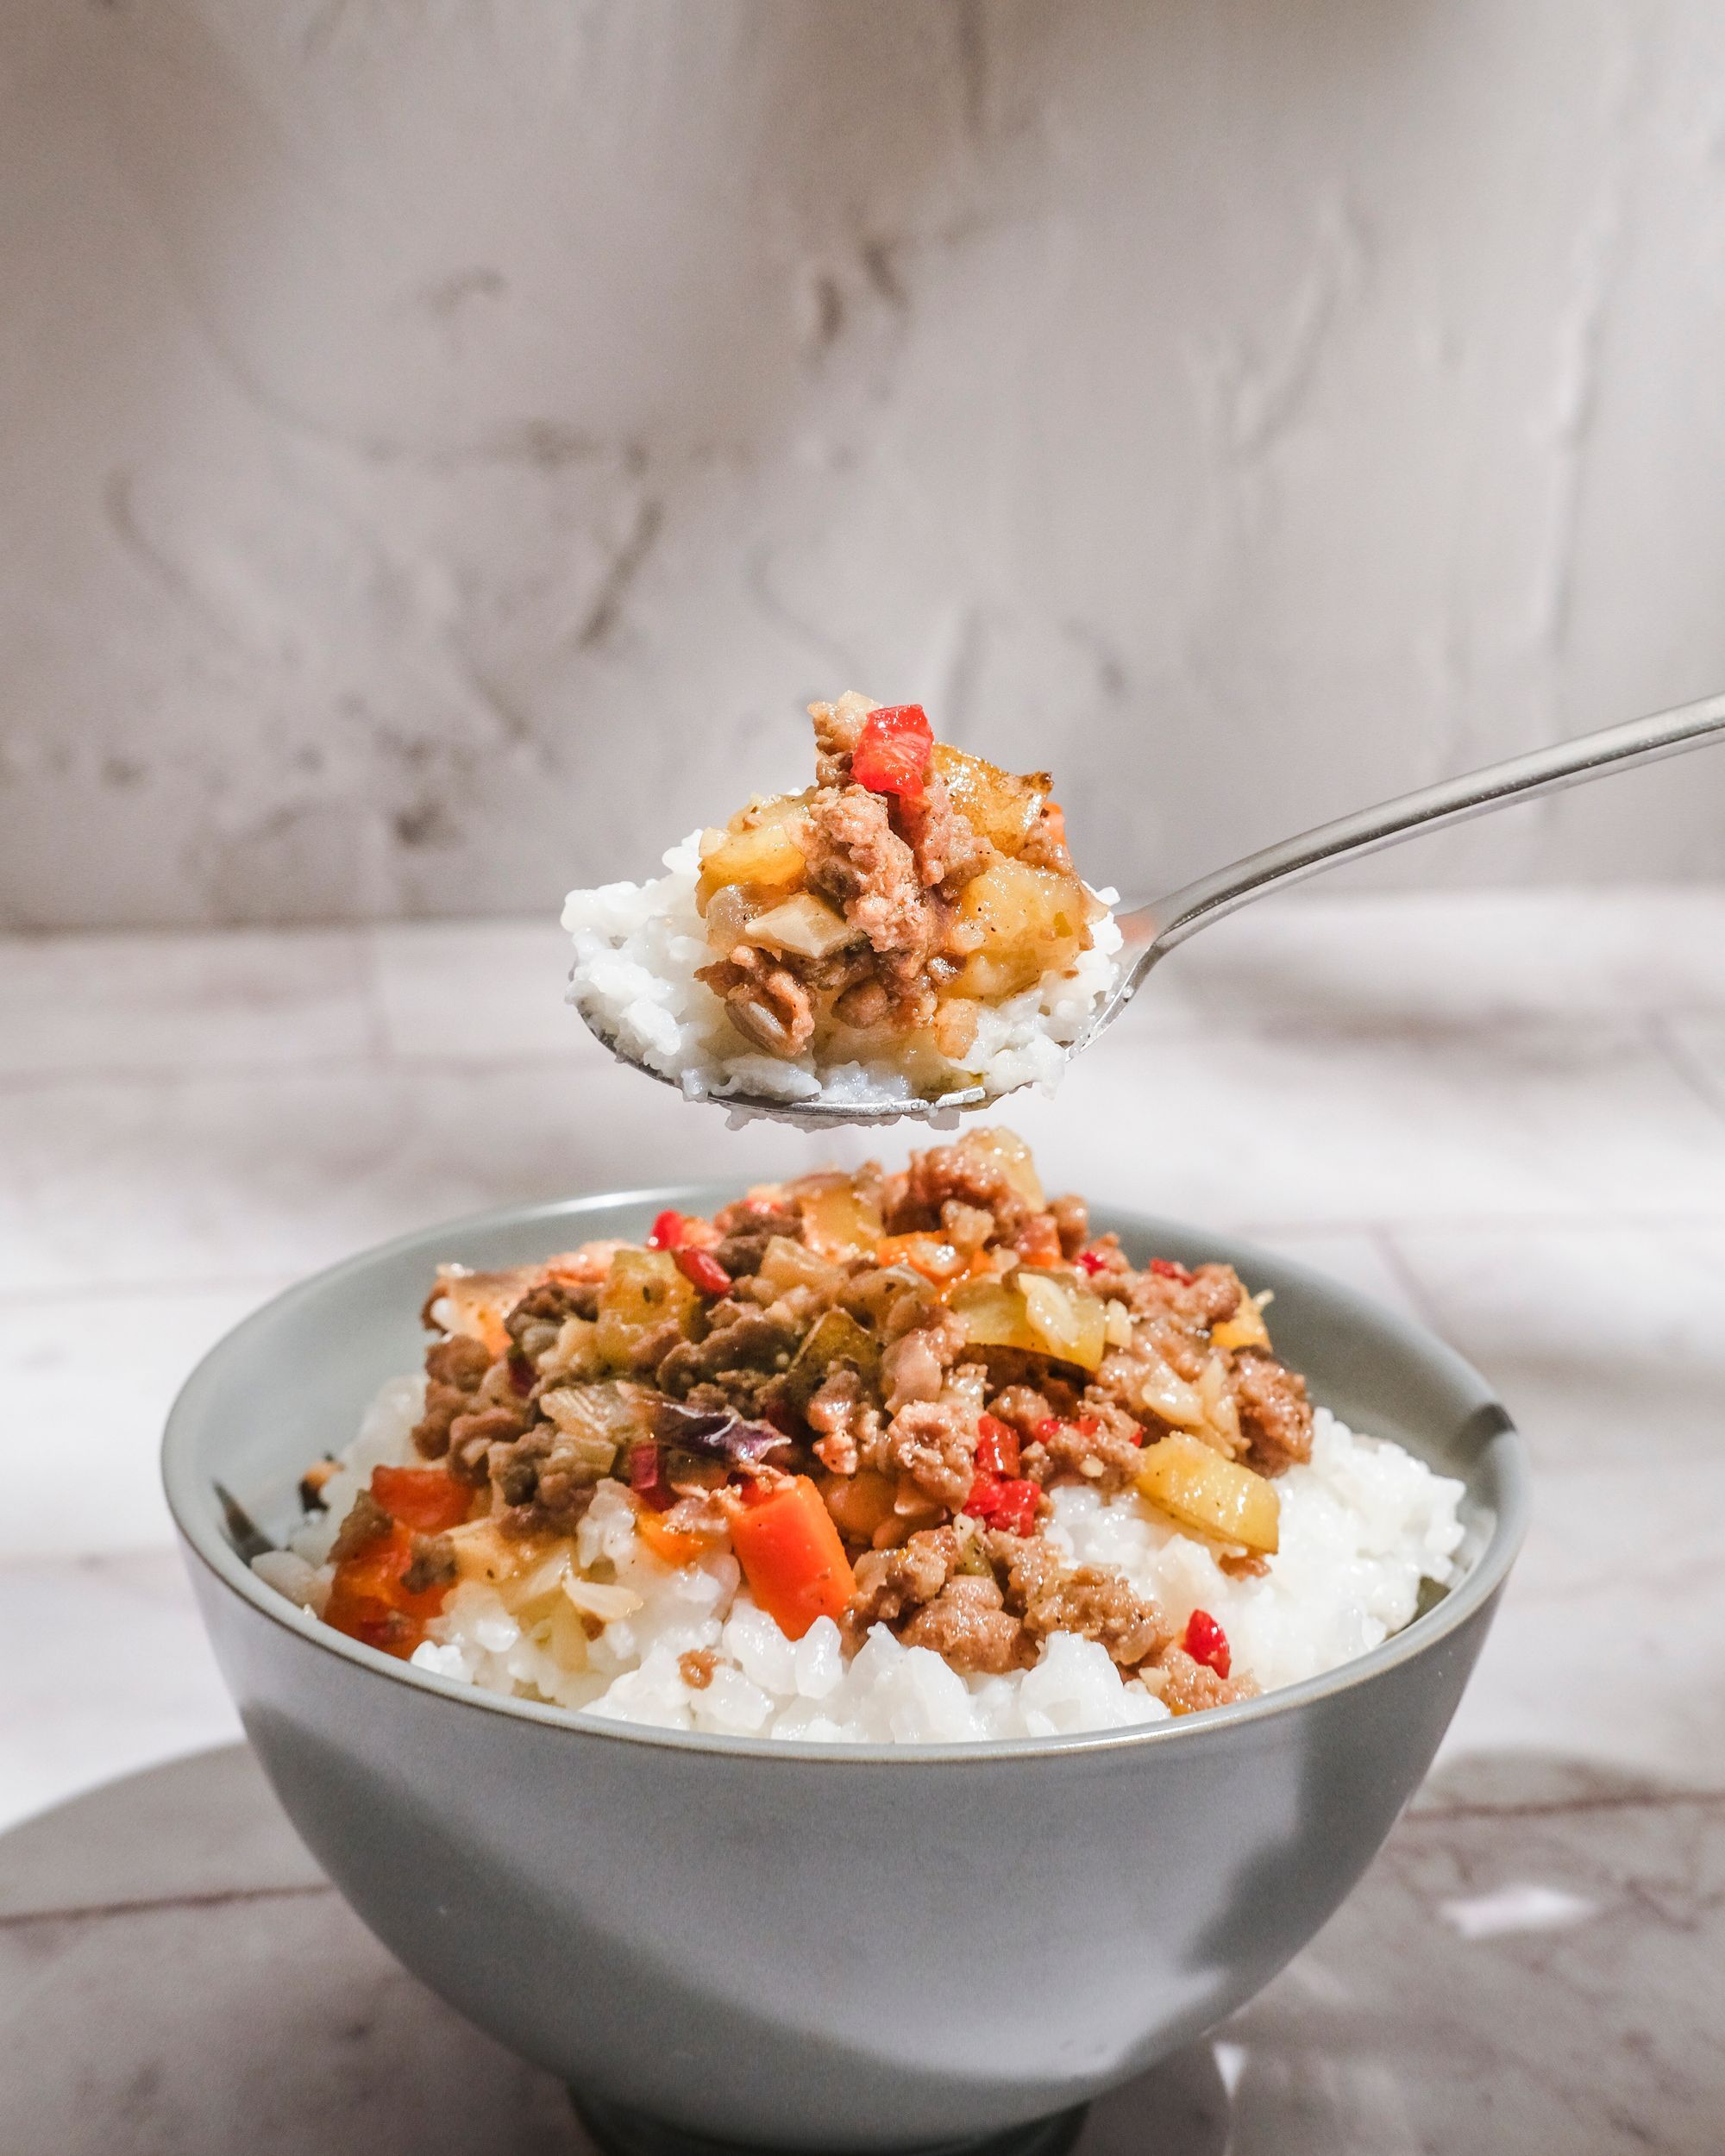 A spoonful of pork giniling with rice